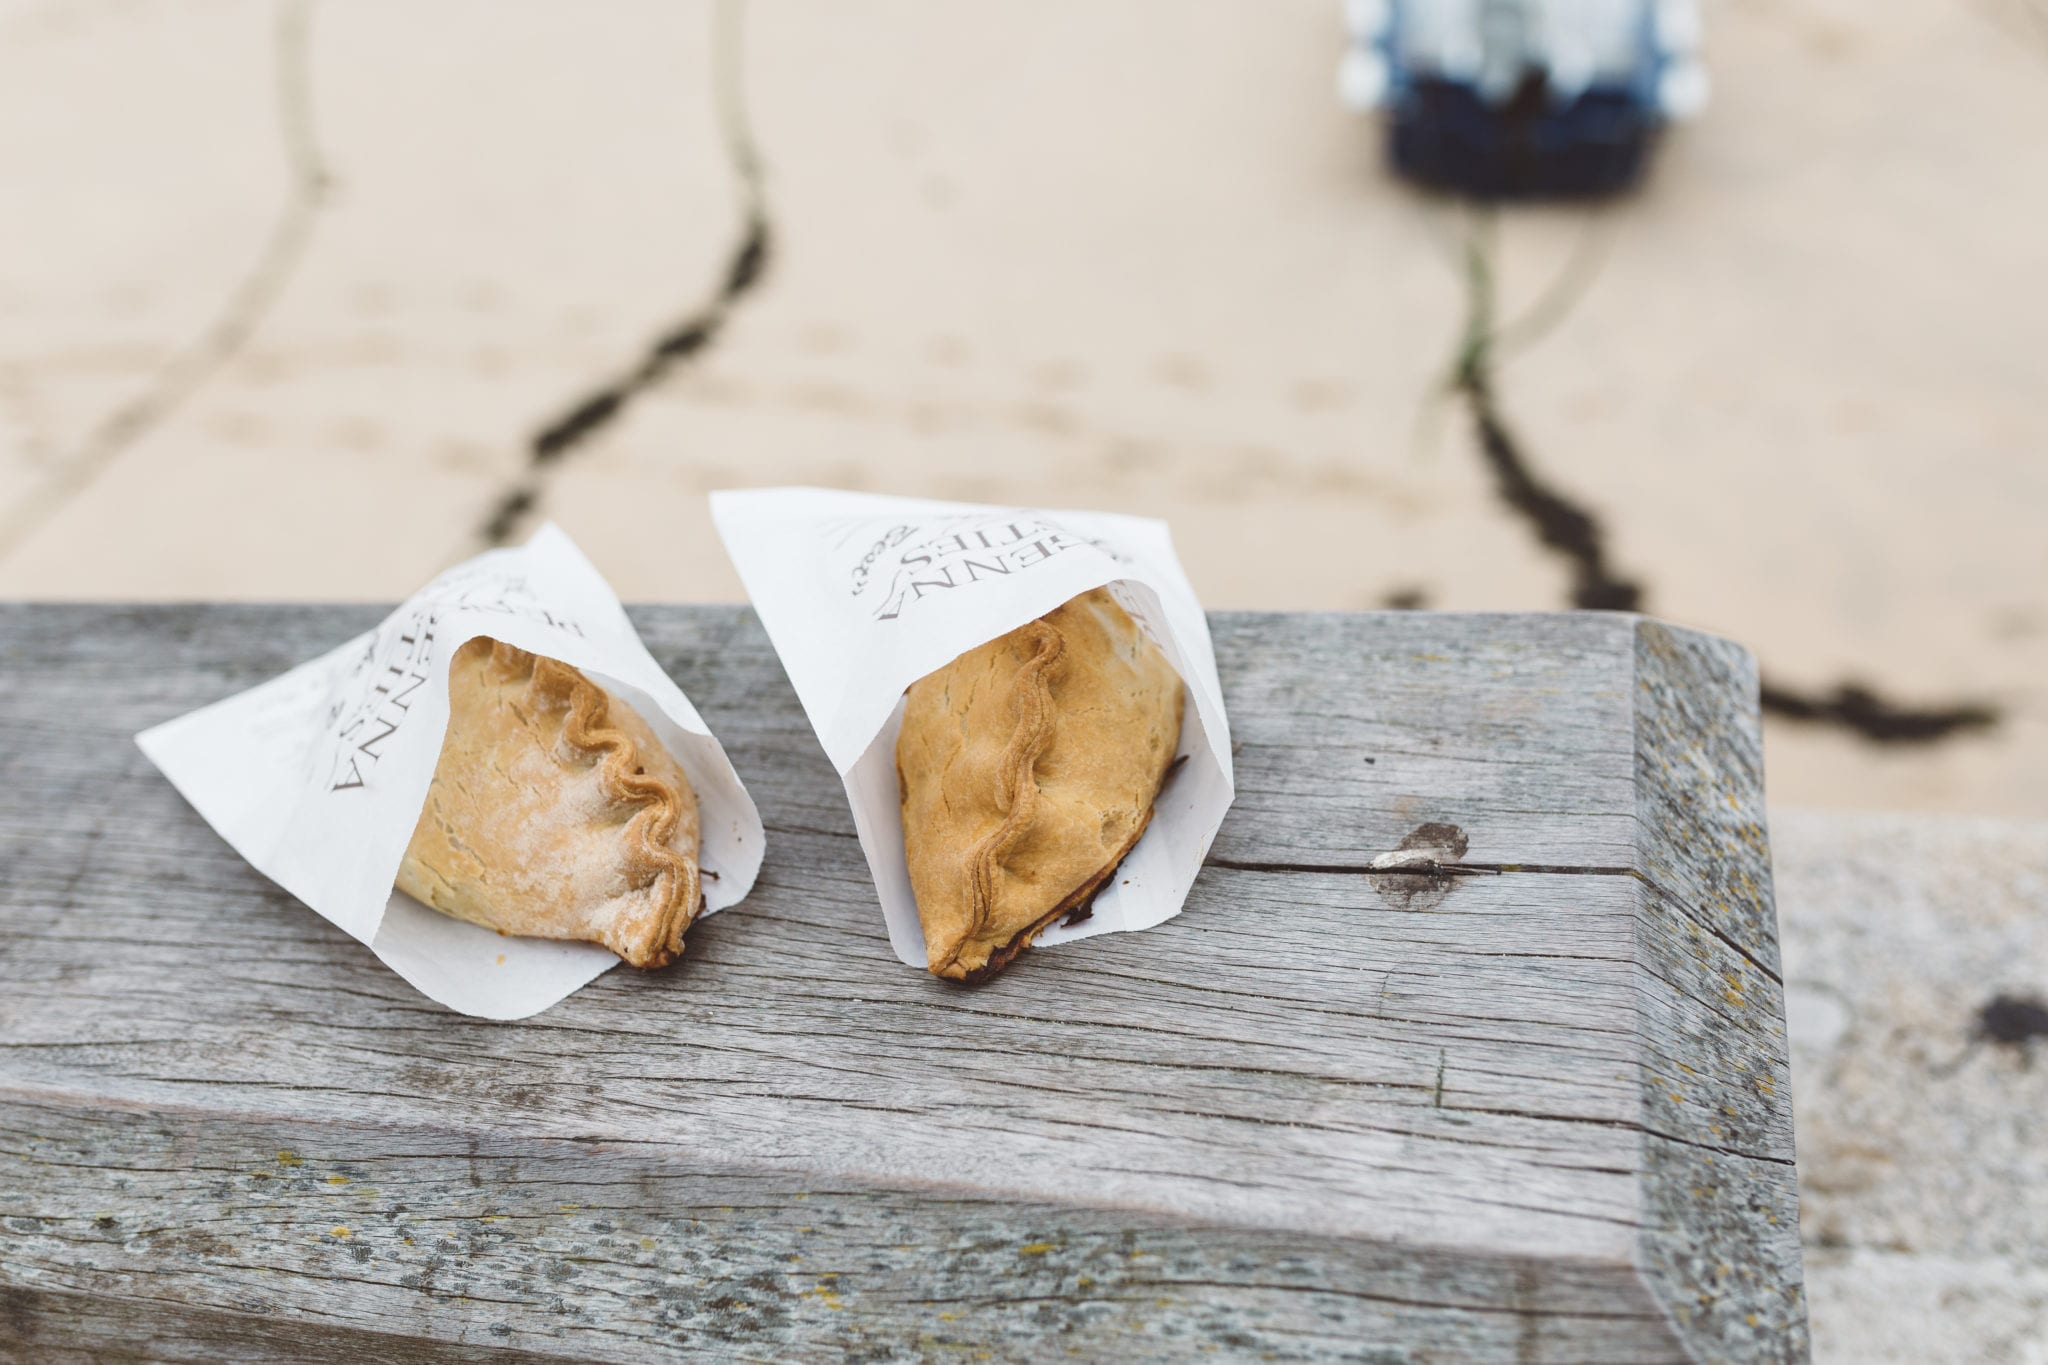 Two traditional Cornish pasties St Ives